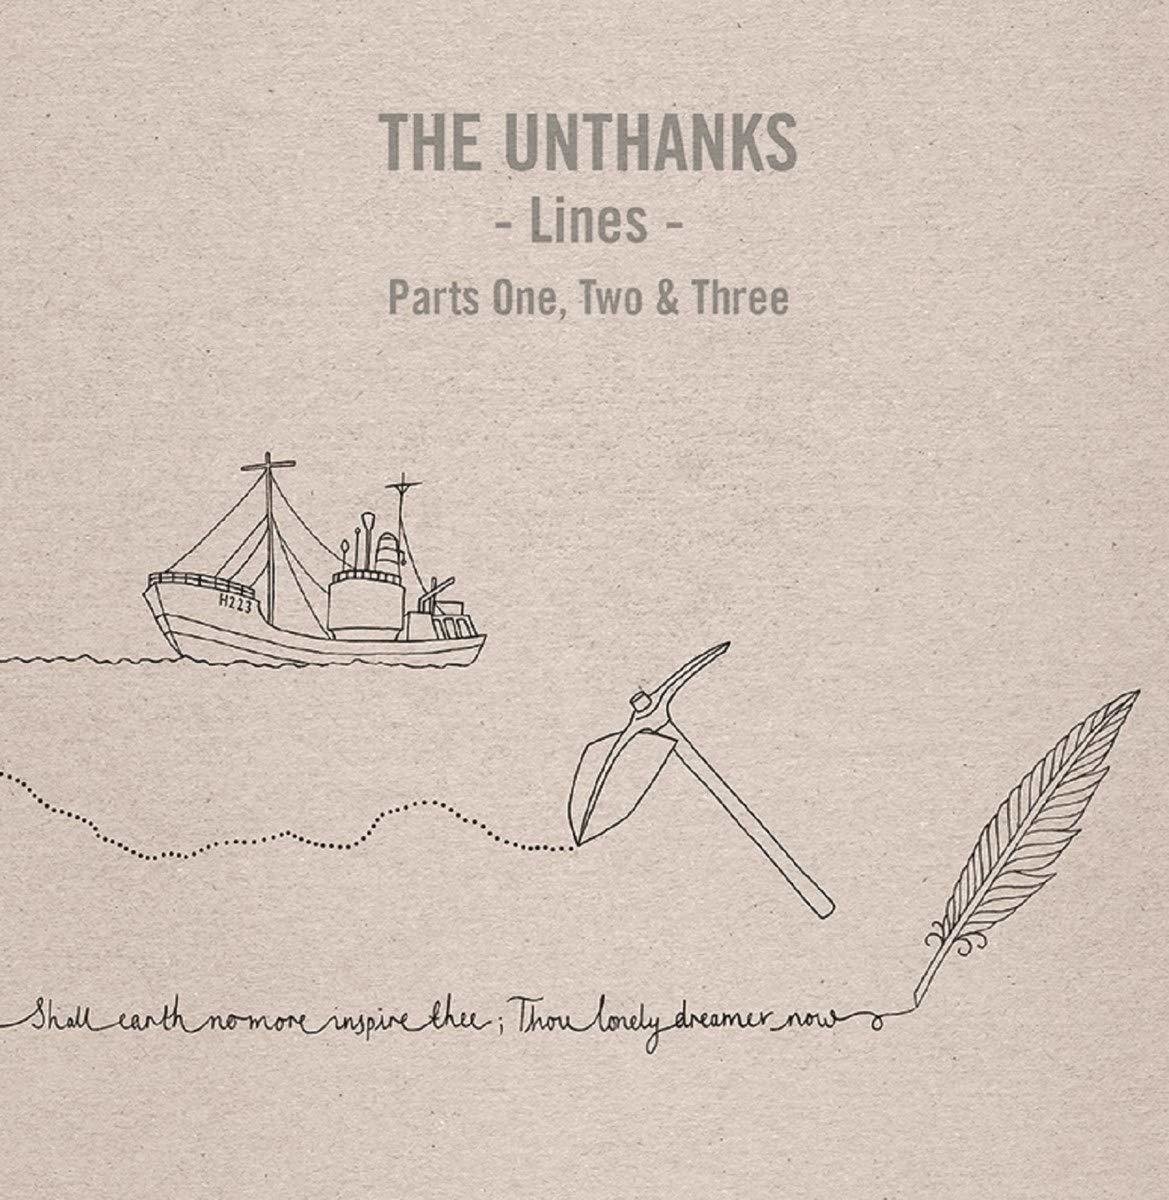 Disc de vinil The Unthanks - Lines - Parts One, Two And Three (3 x 10" Vinyl)